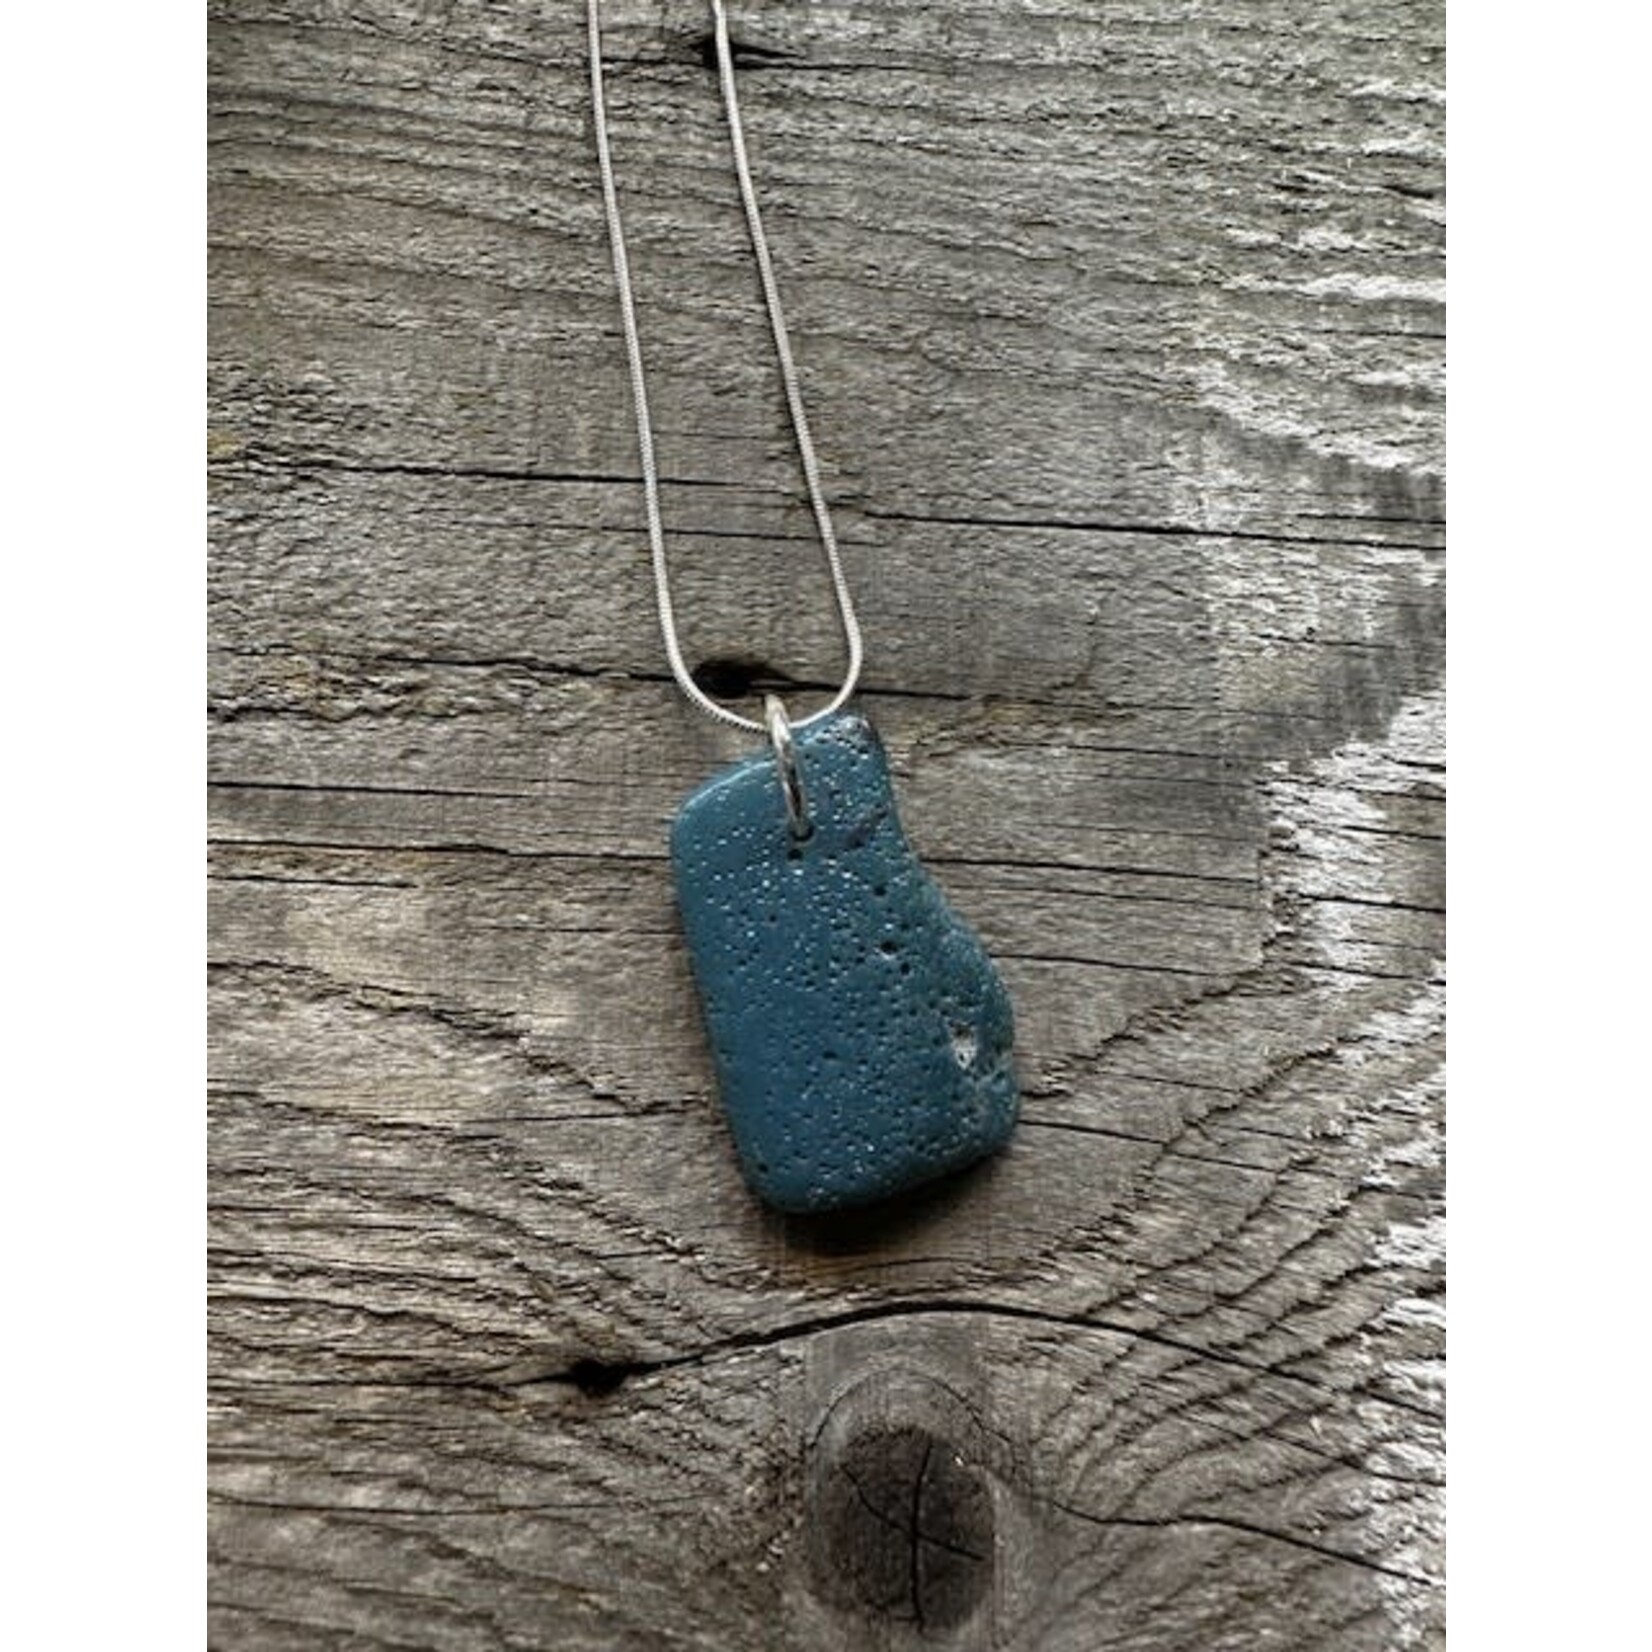 Blue Water Creations Necklace - Leland Blue1